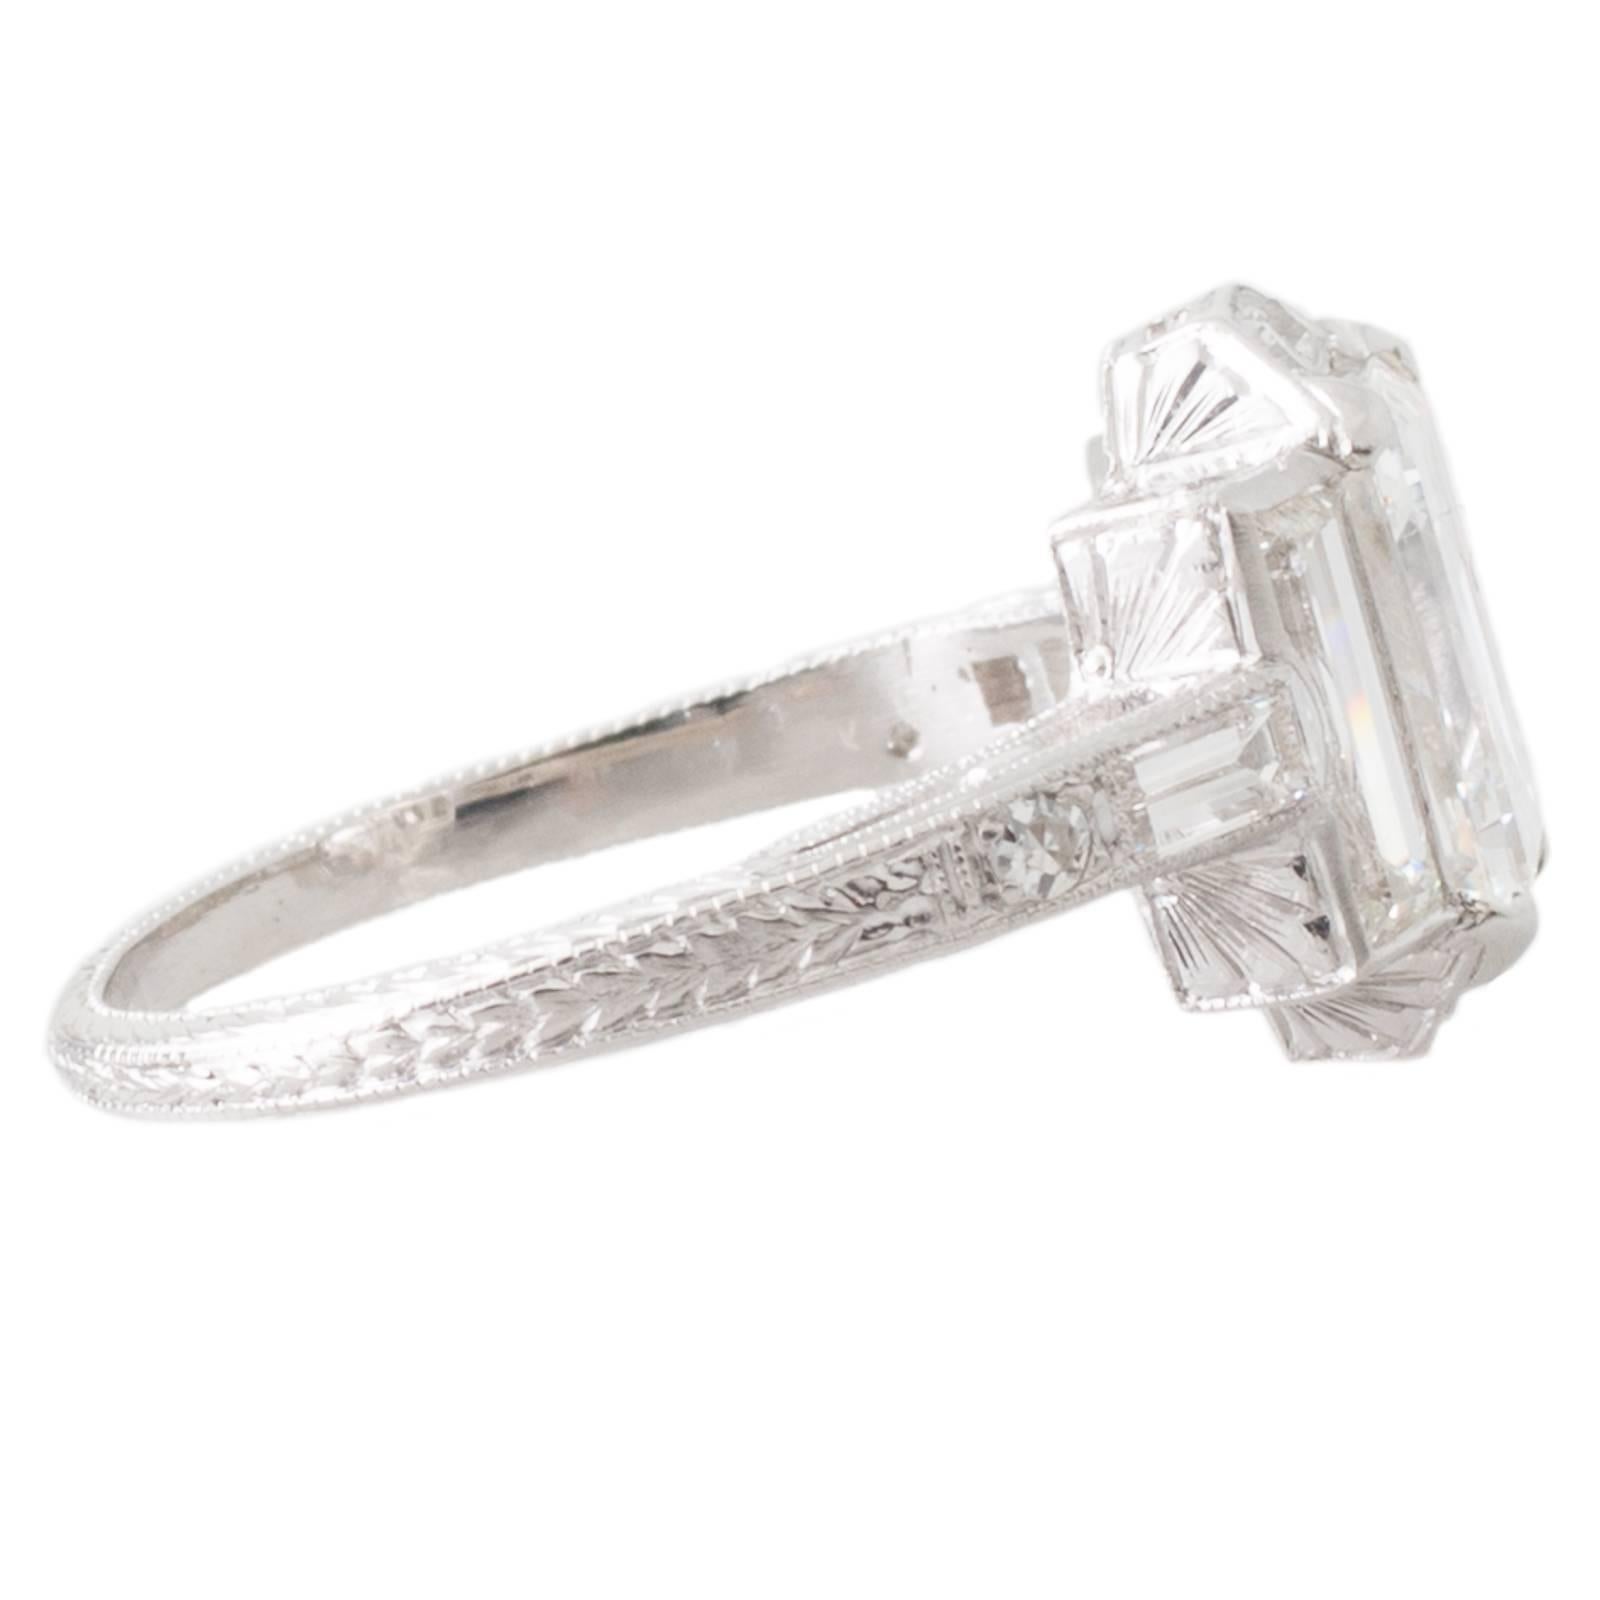 Platinum Art Deco ring set in four corner claws to the centre with a GIA certified 1.38ct rectangular step cut diamond graded as colour G clarity VS1 flanked to either side with a baguette cut diamond and grain set to the top and bottom ends with